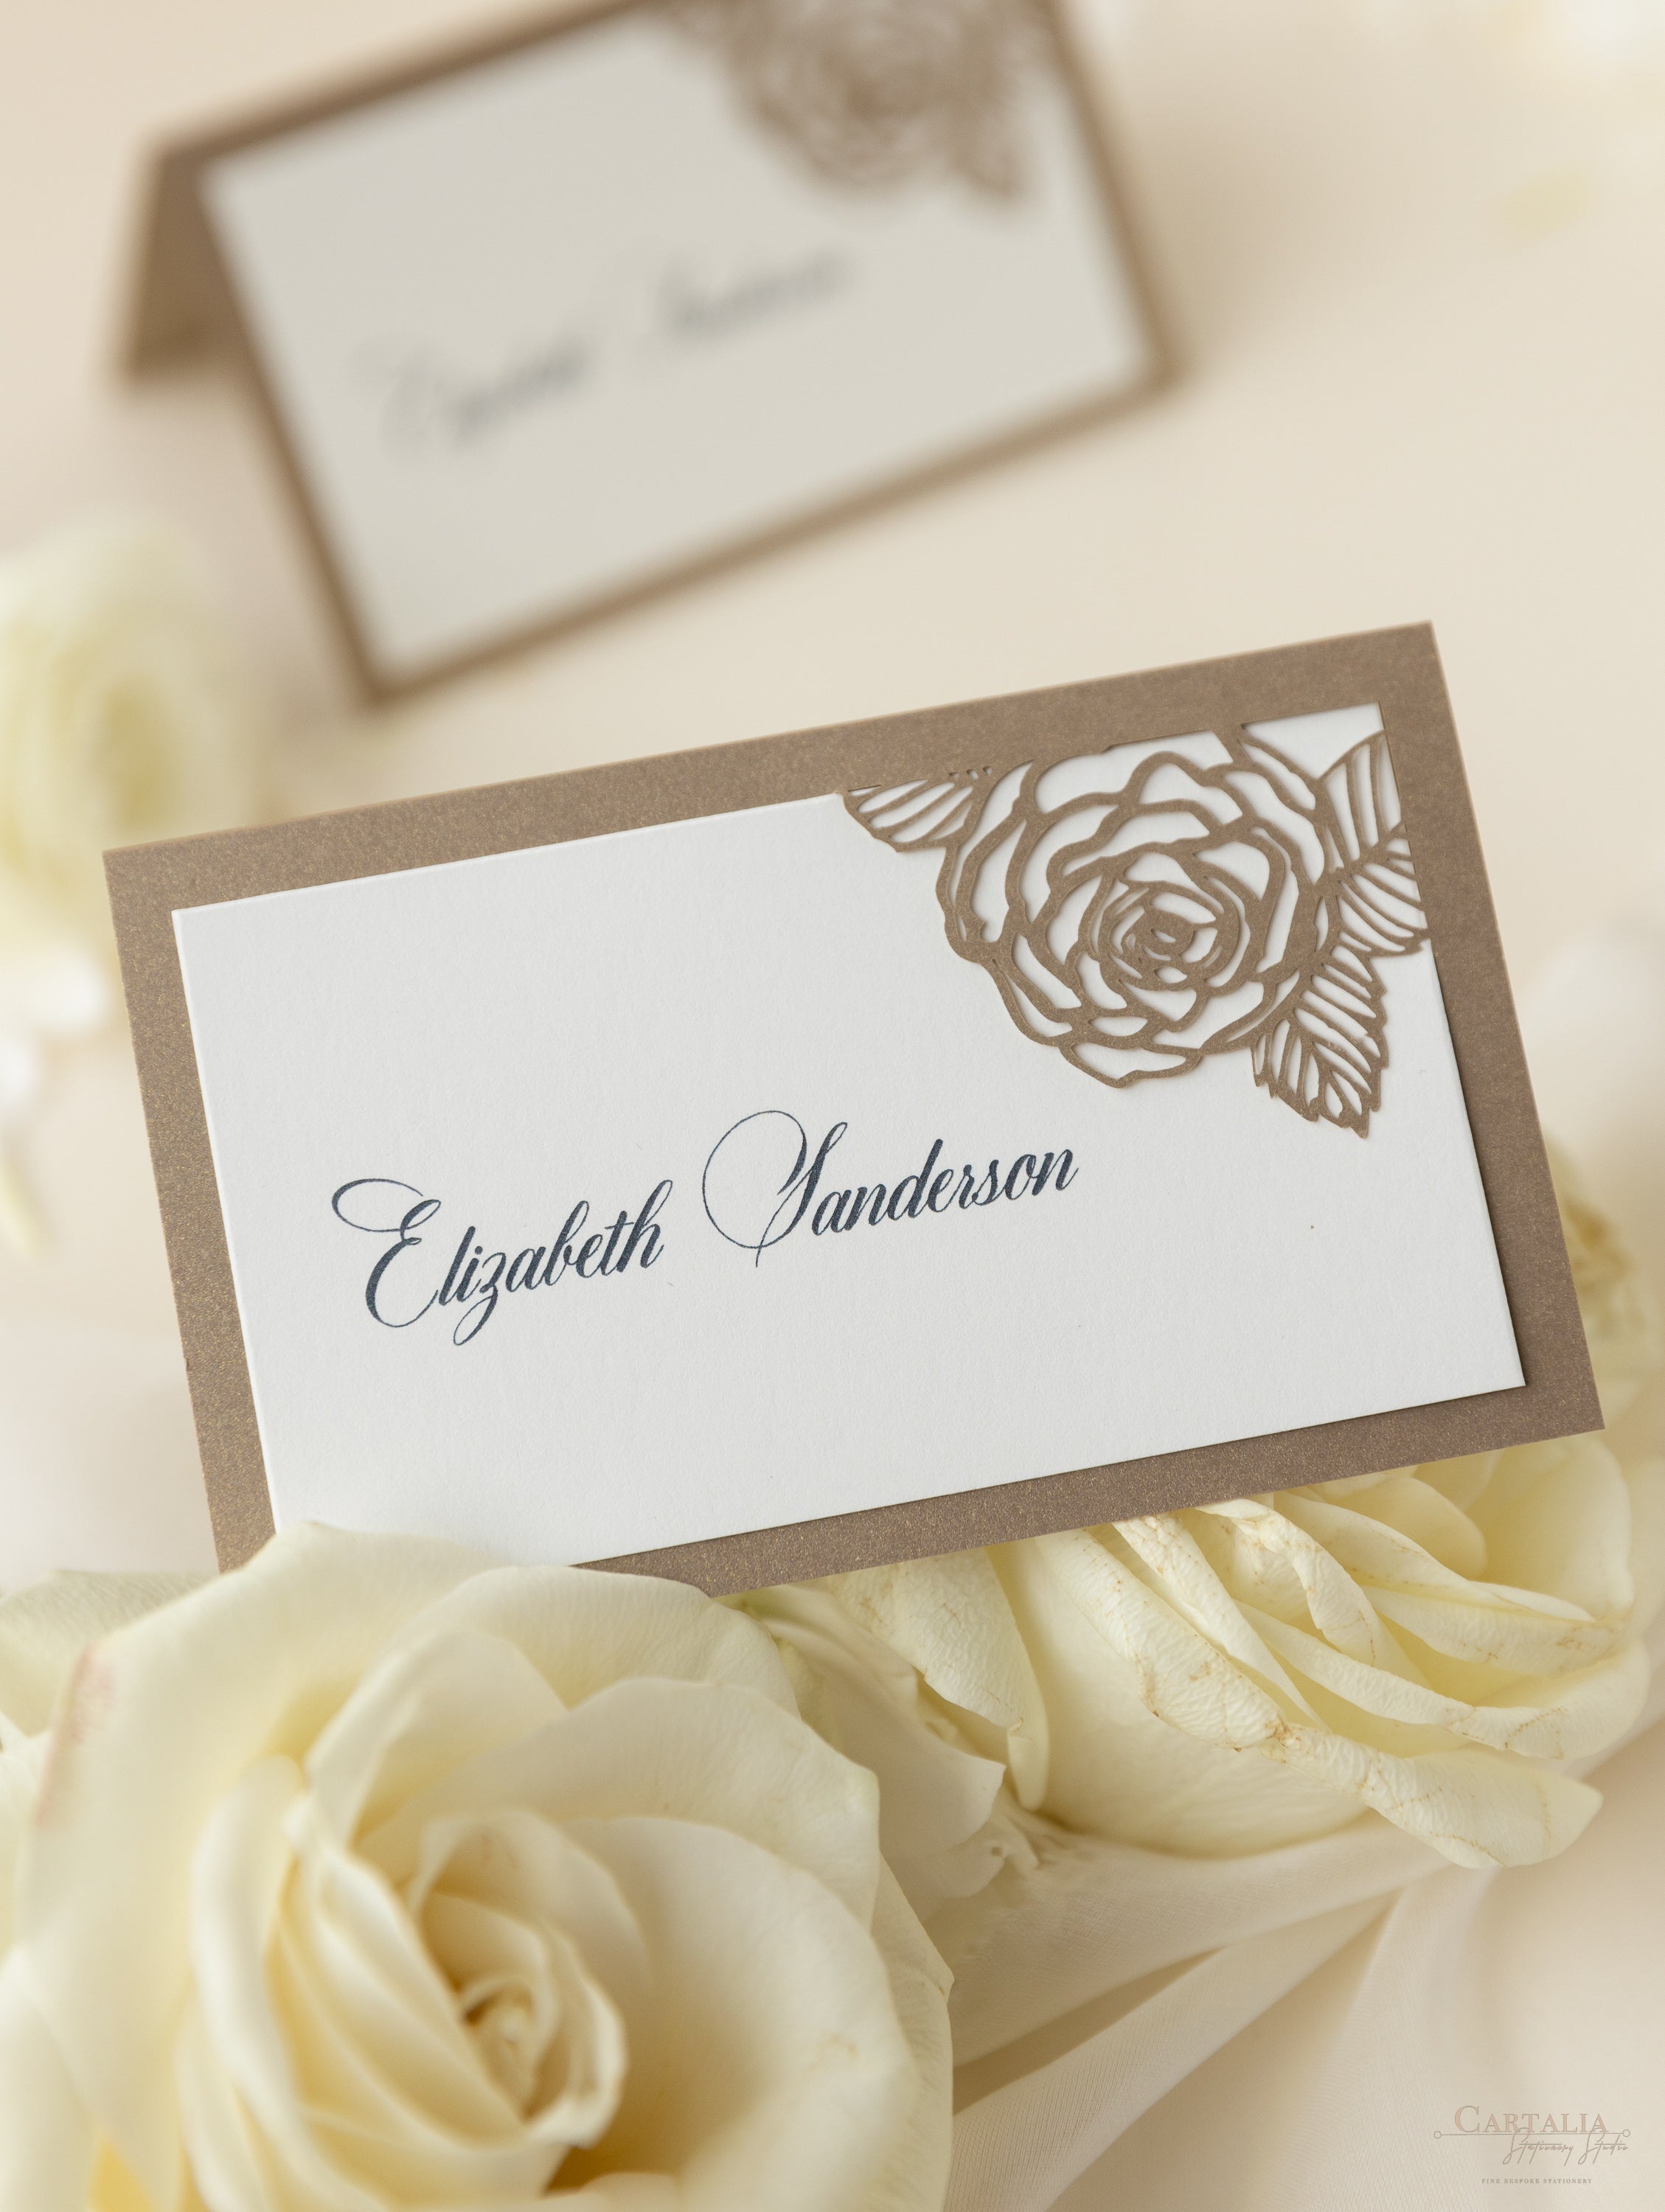 Heirloom Roses Stationery Cards